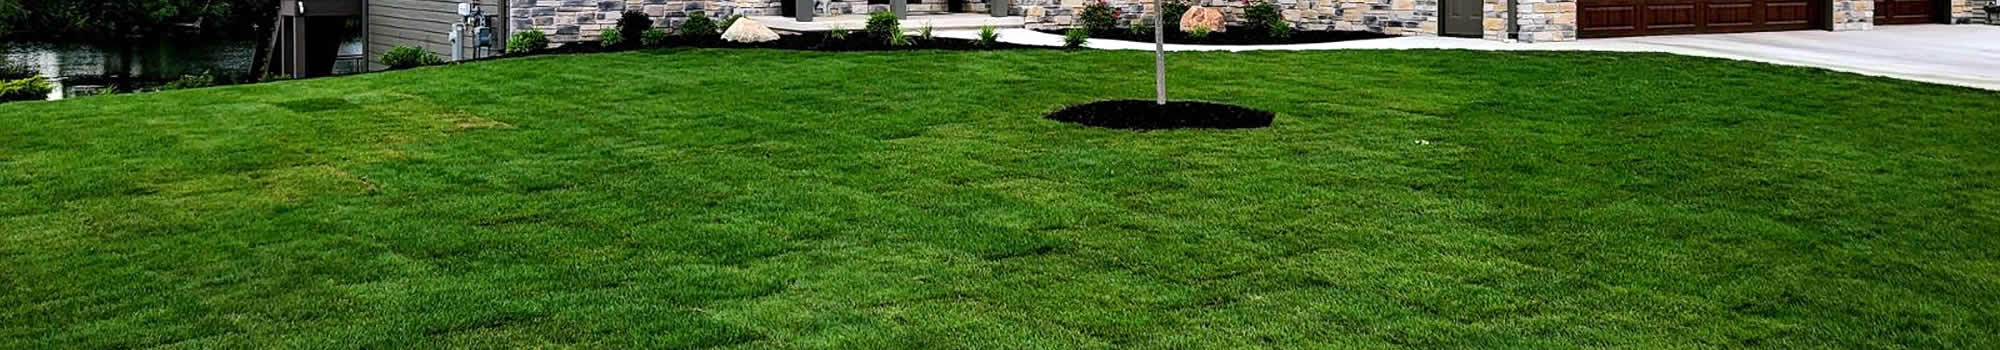 New Lawn Installations in ^^city^^, WI